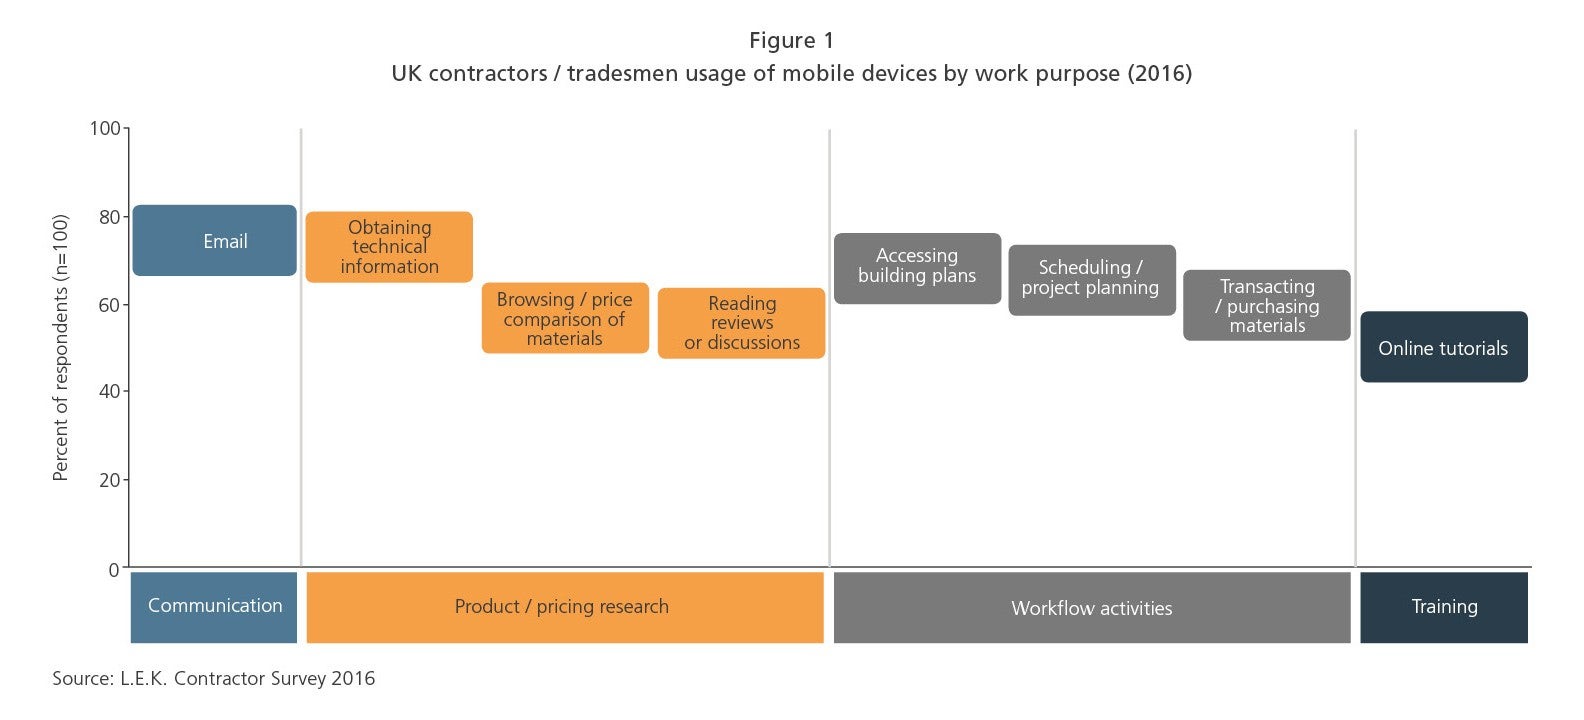 UK Contractors / tradesmen usage of mobile devices by work purpose 2016